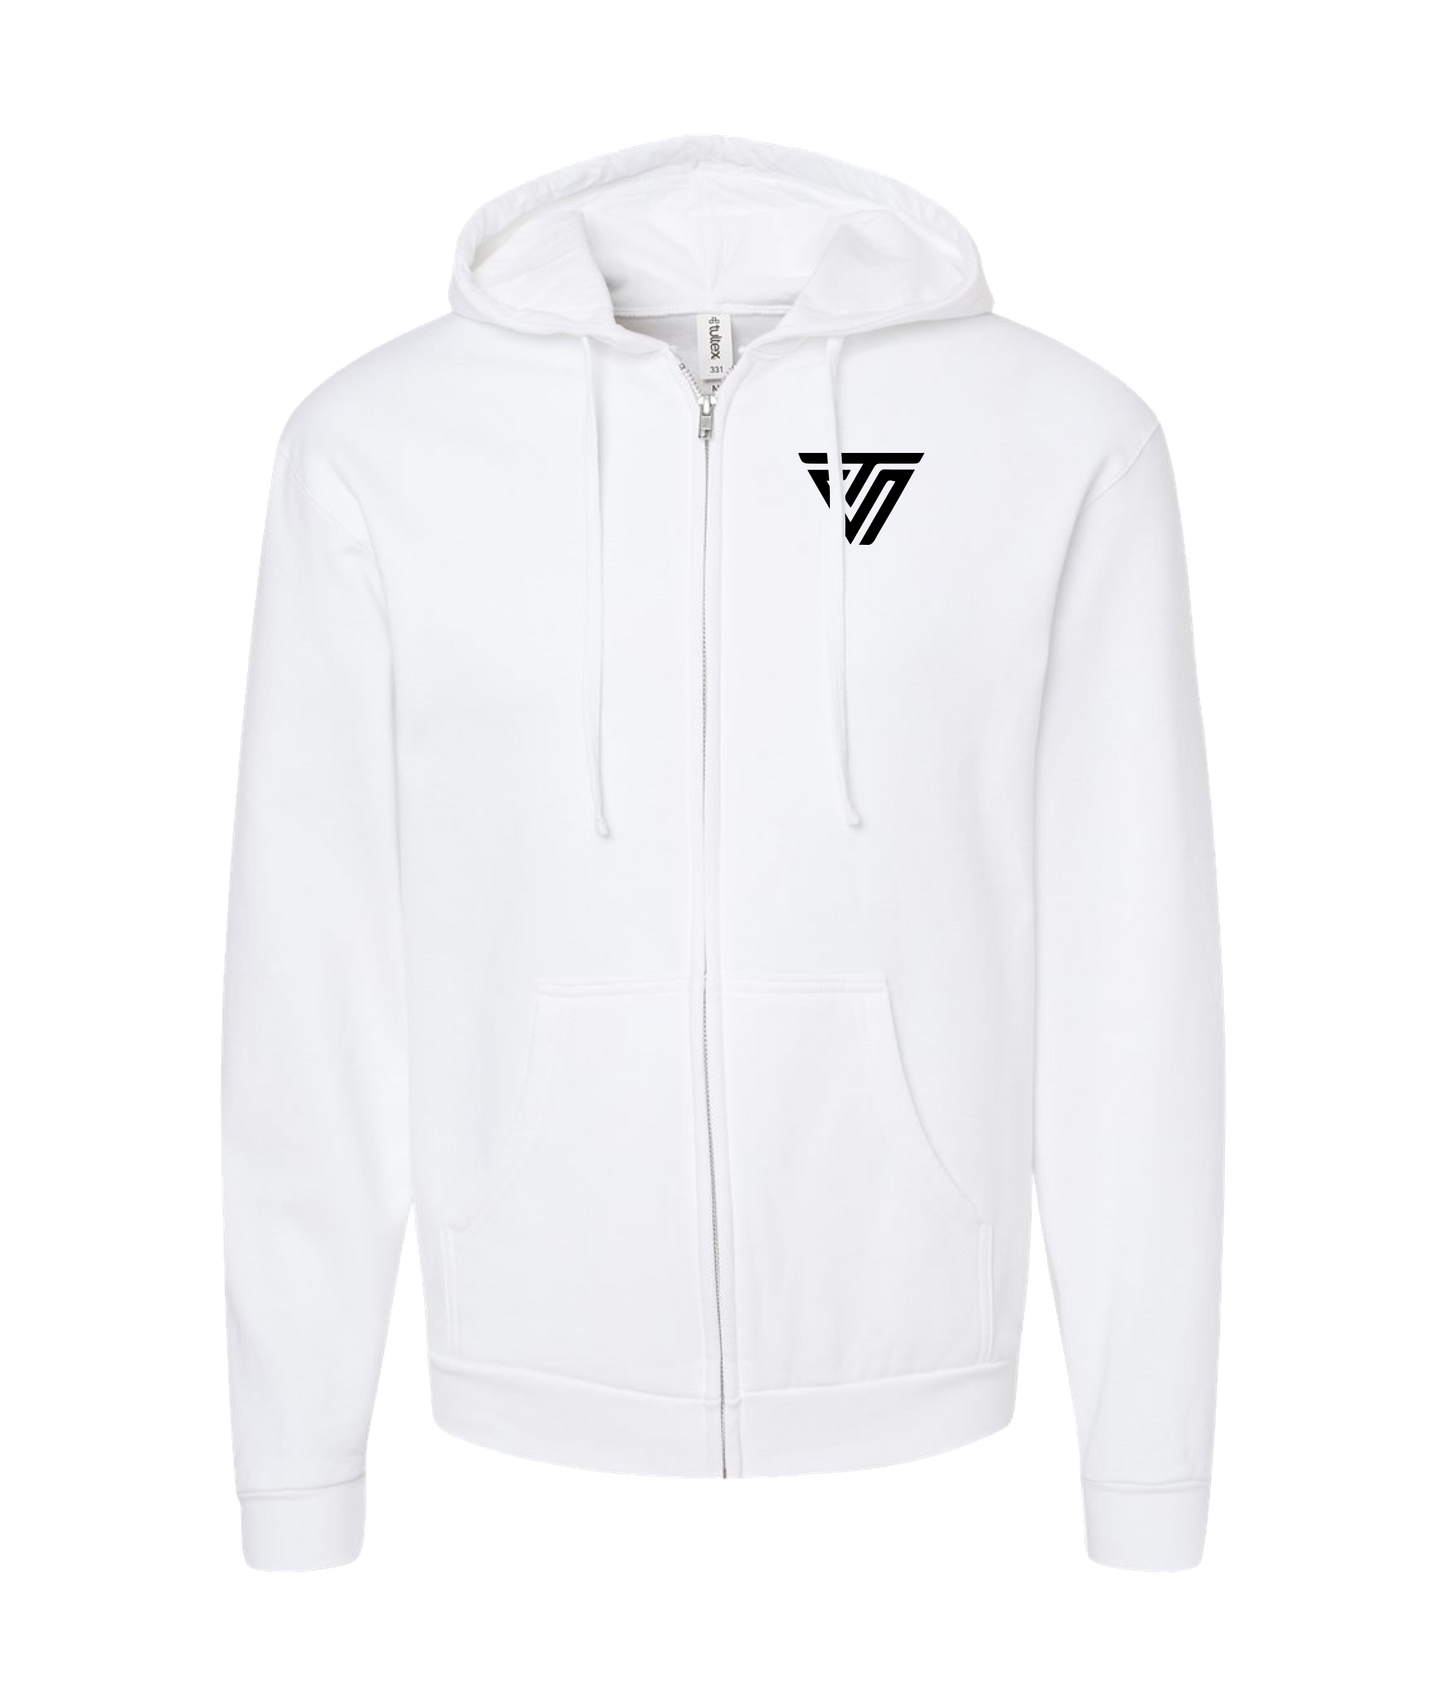 TheShift - The Triangle - White Zip Up Hoodie